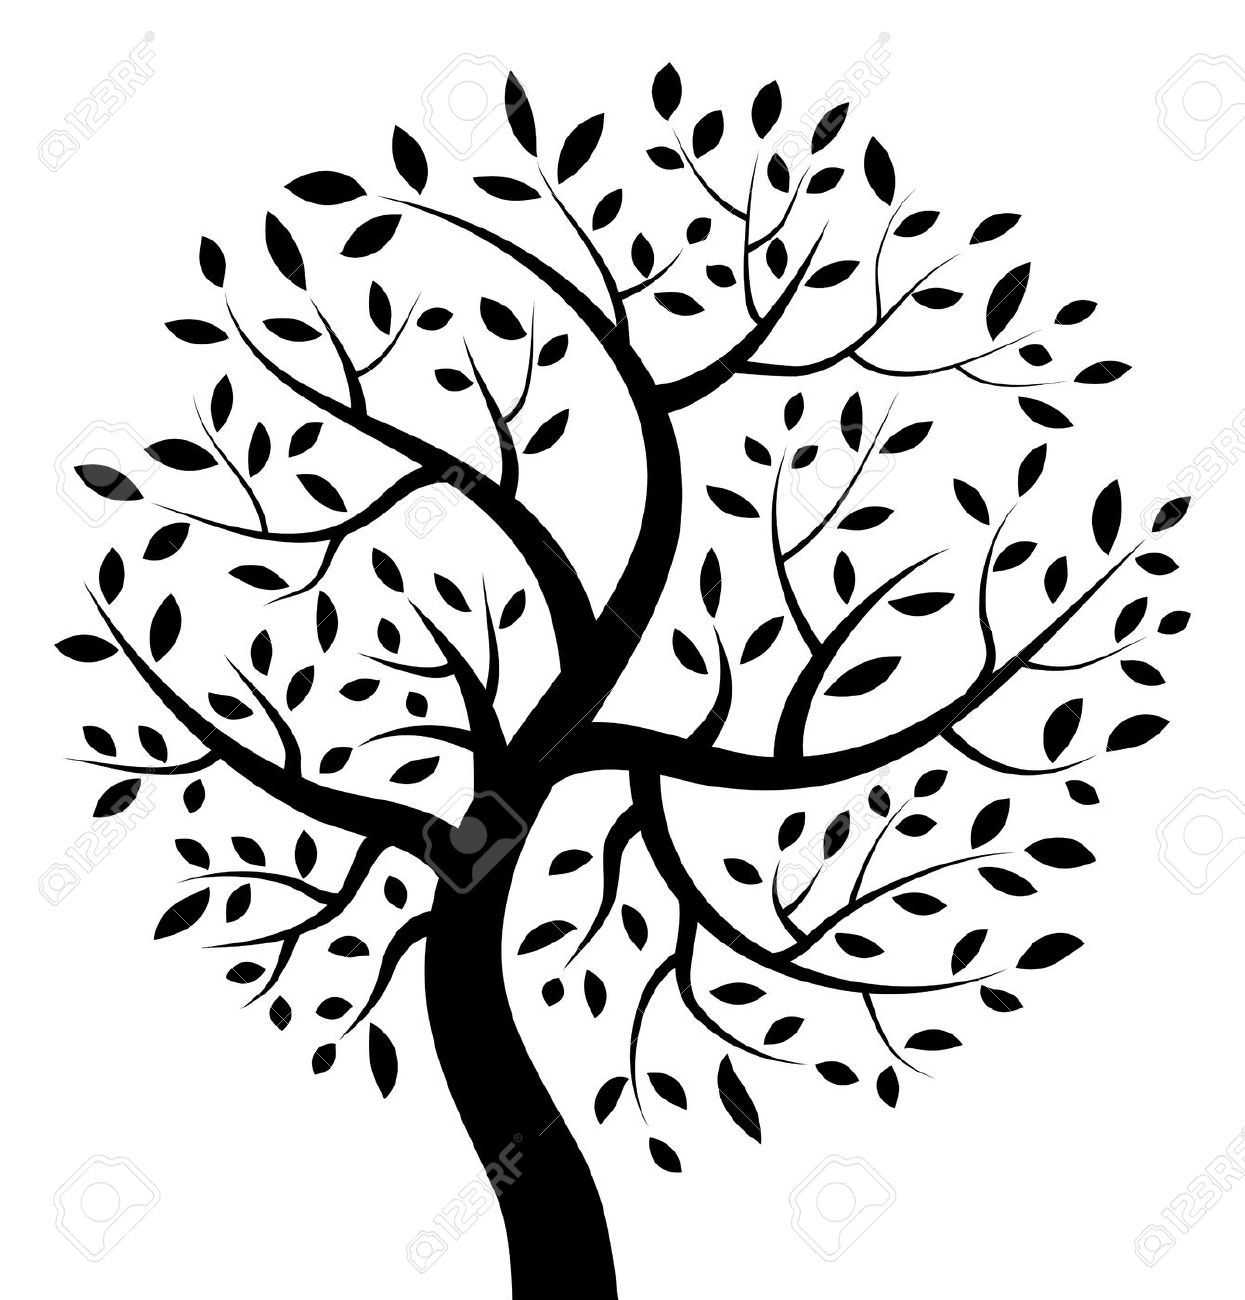 Tree of life clipart black and white